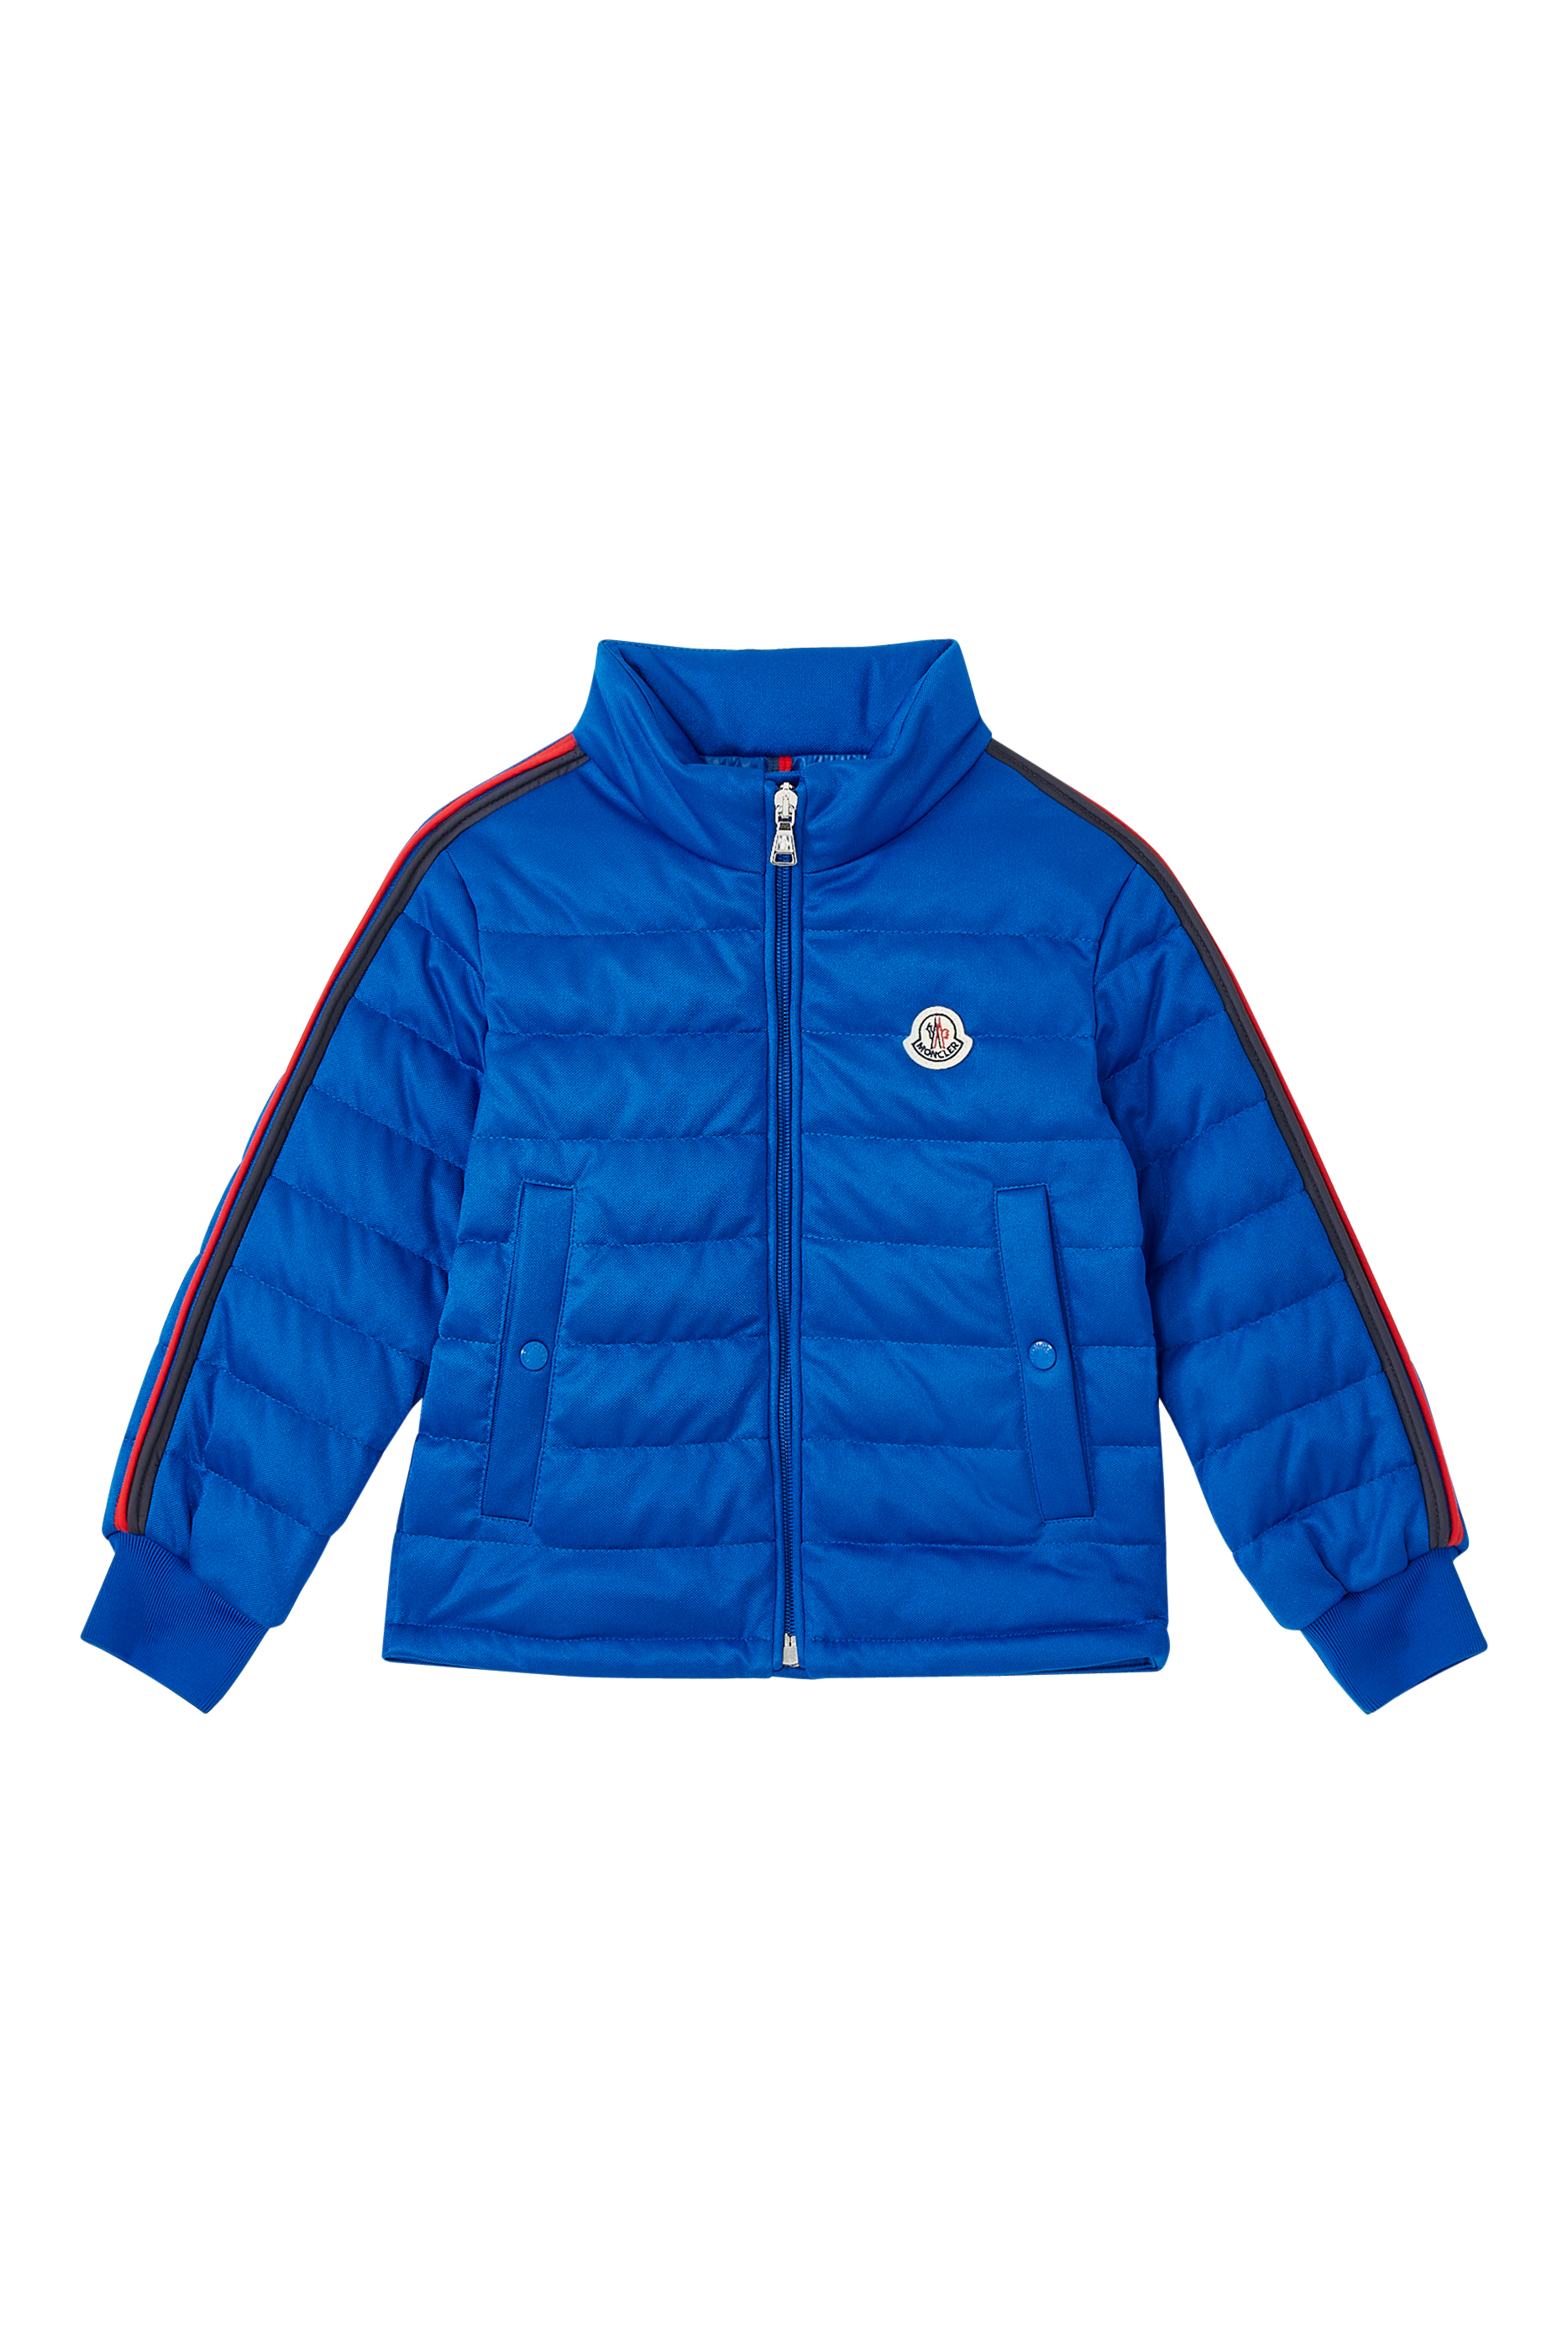 Moncler Boy's Lauros Puffer Jacket, Size 8-14 Bergdorf, 53% OFF